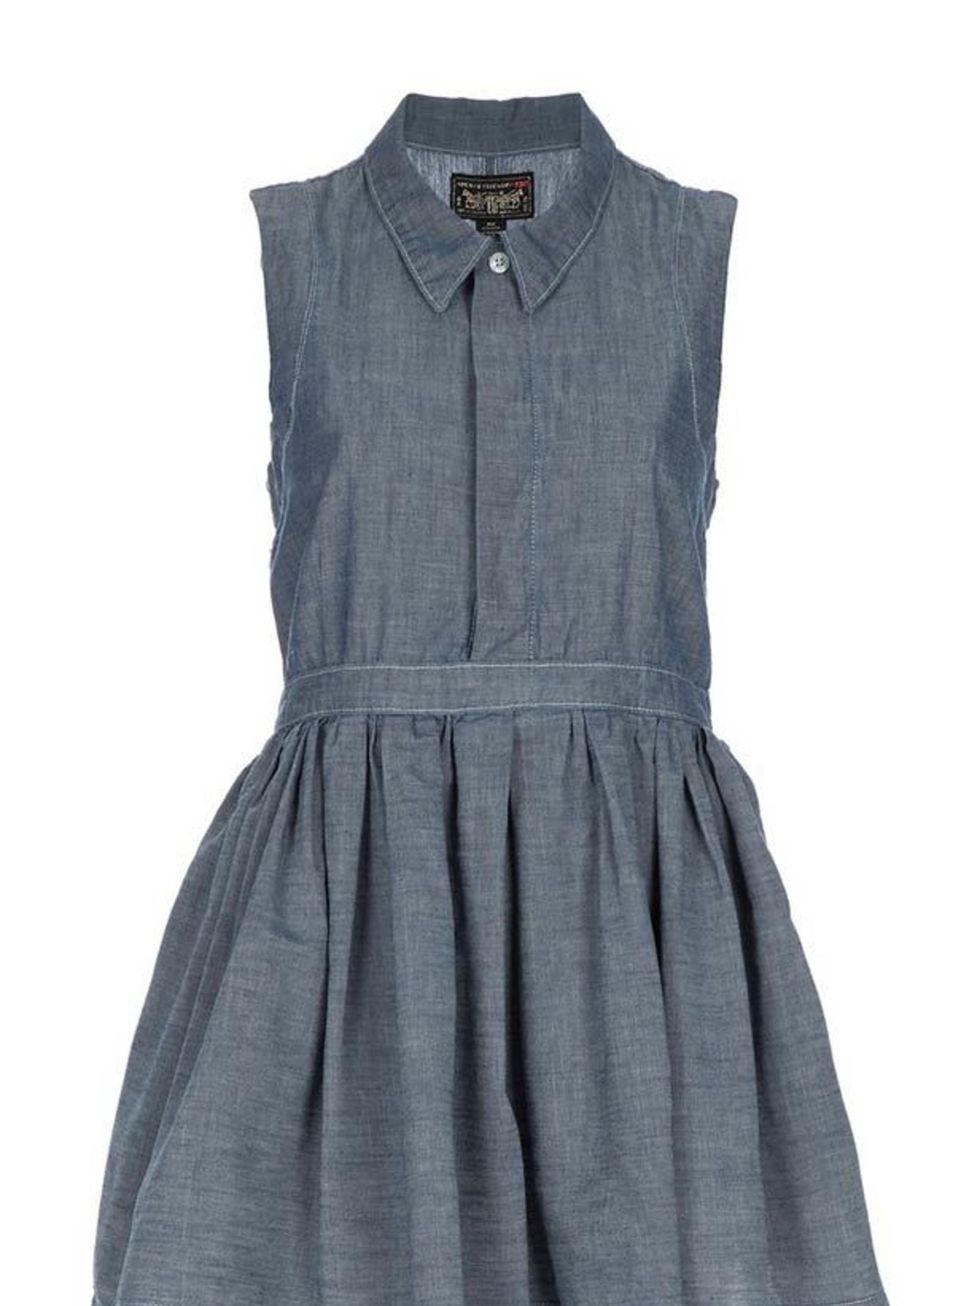 <p>Denim is big news this season so get in on the act with this cult brand union Opening Ceremony for Levi's chambray dress, £200, at <a href="http://www.no-one.co.uk/shopping/women/search/schid-6f70656e696e6720636572656d6f6e79/item10081874.aspx">No-One<